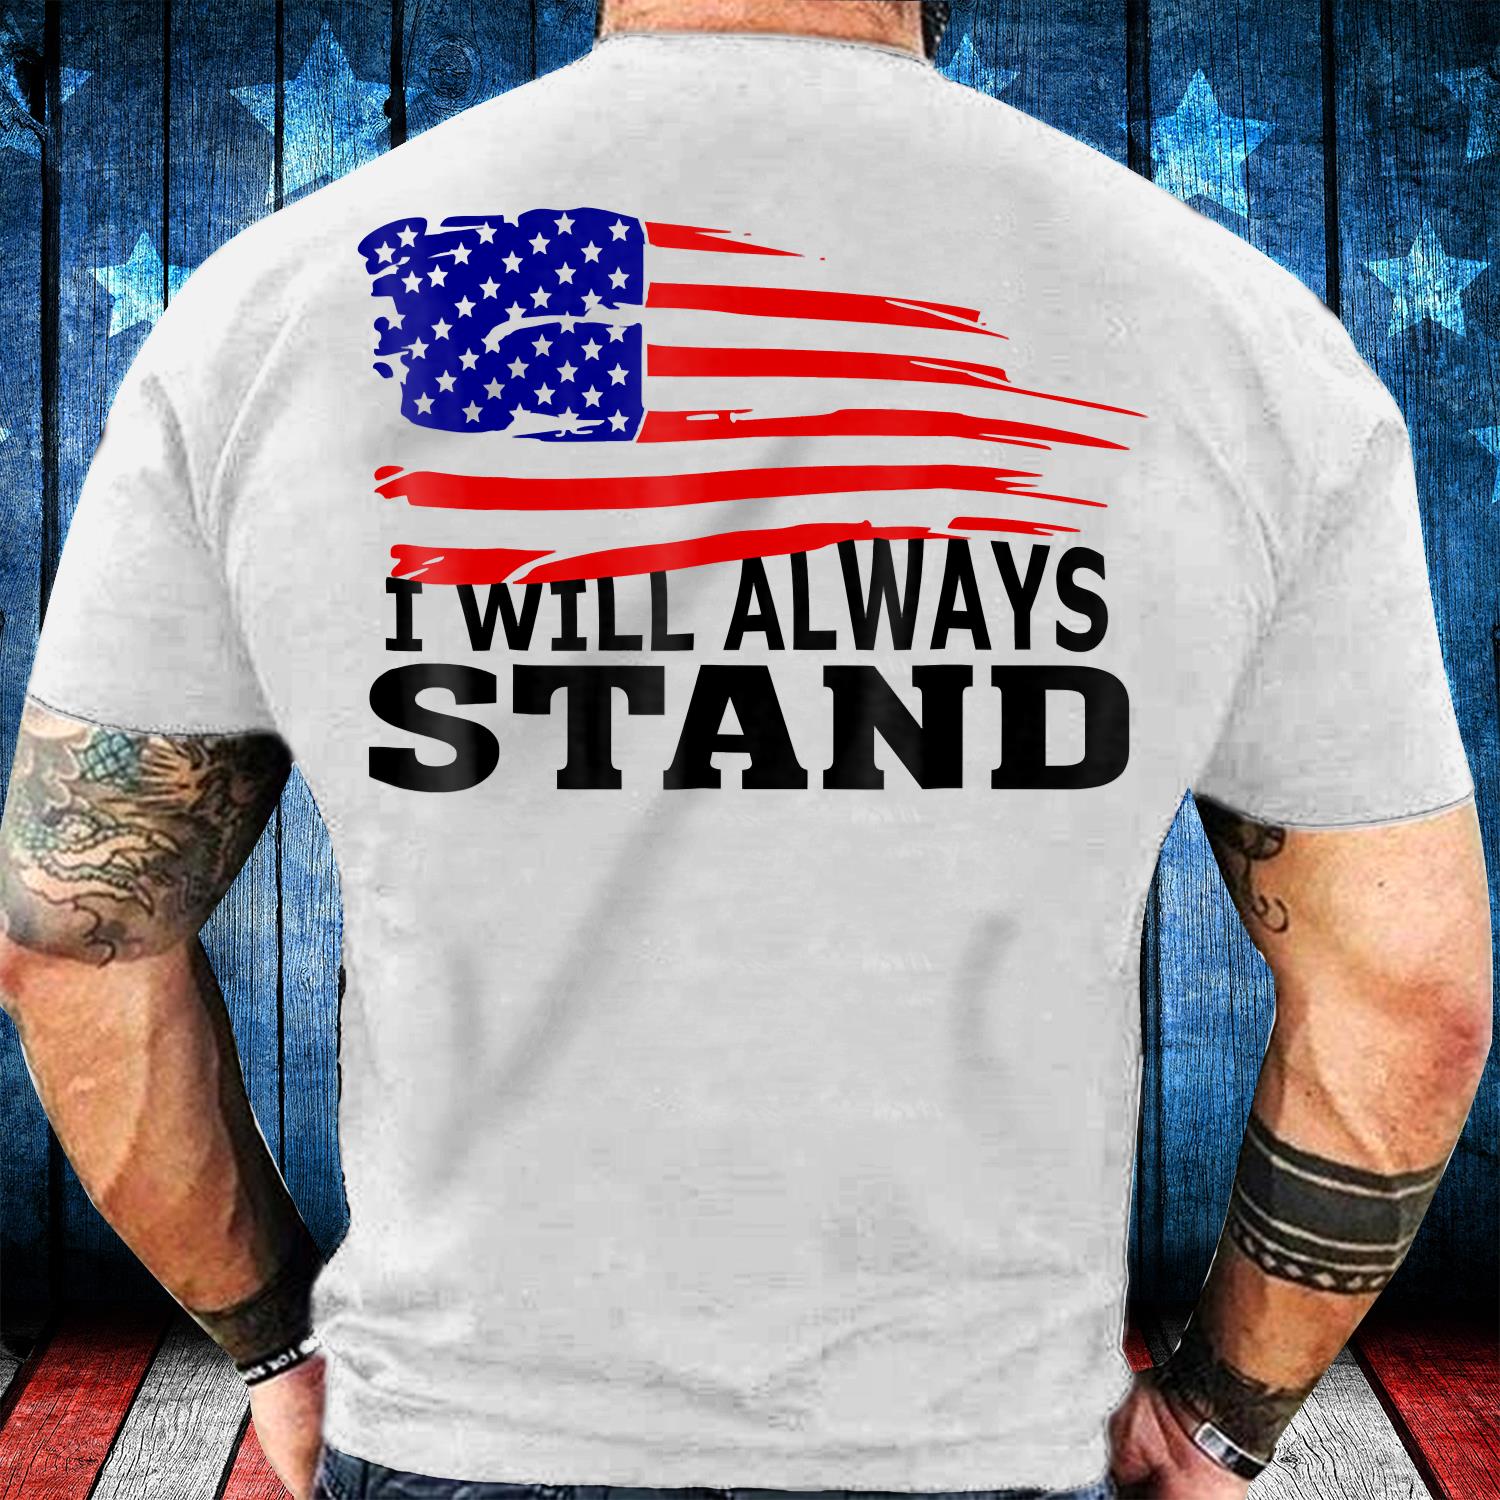 American Flag Tee I Will Always Stand T-Shirt